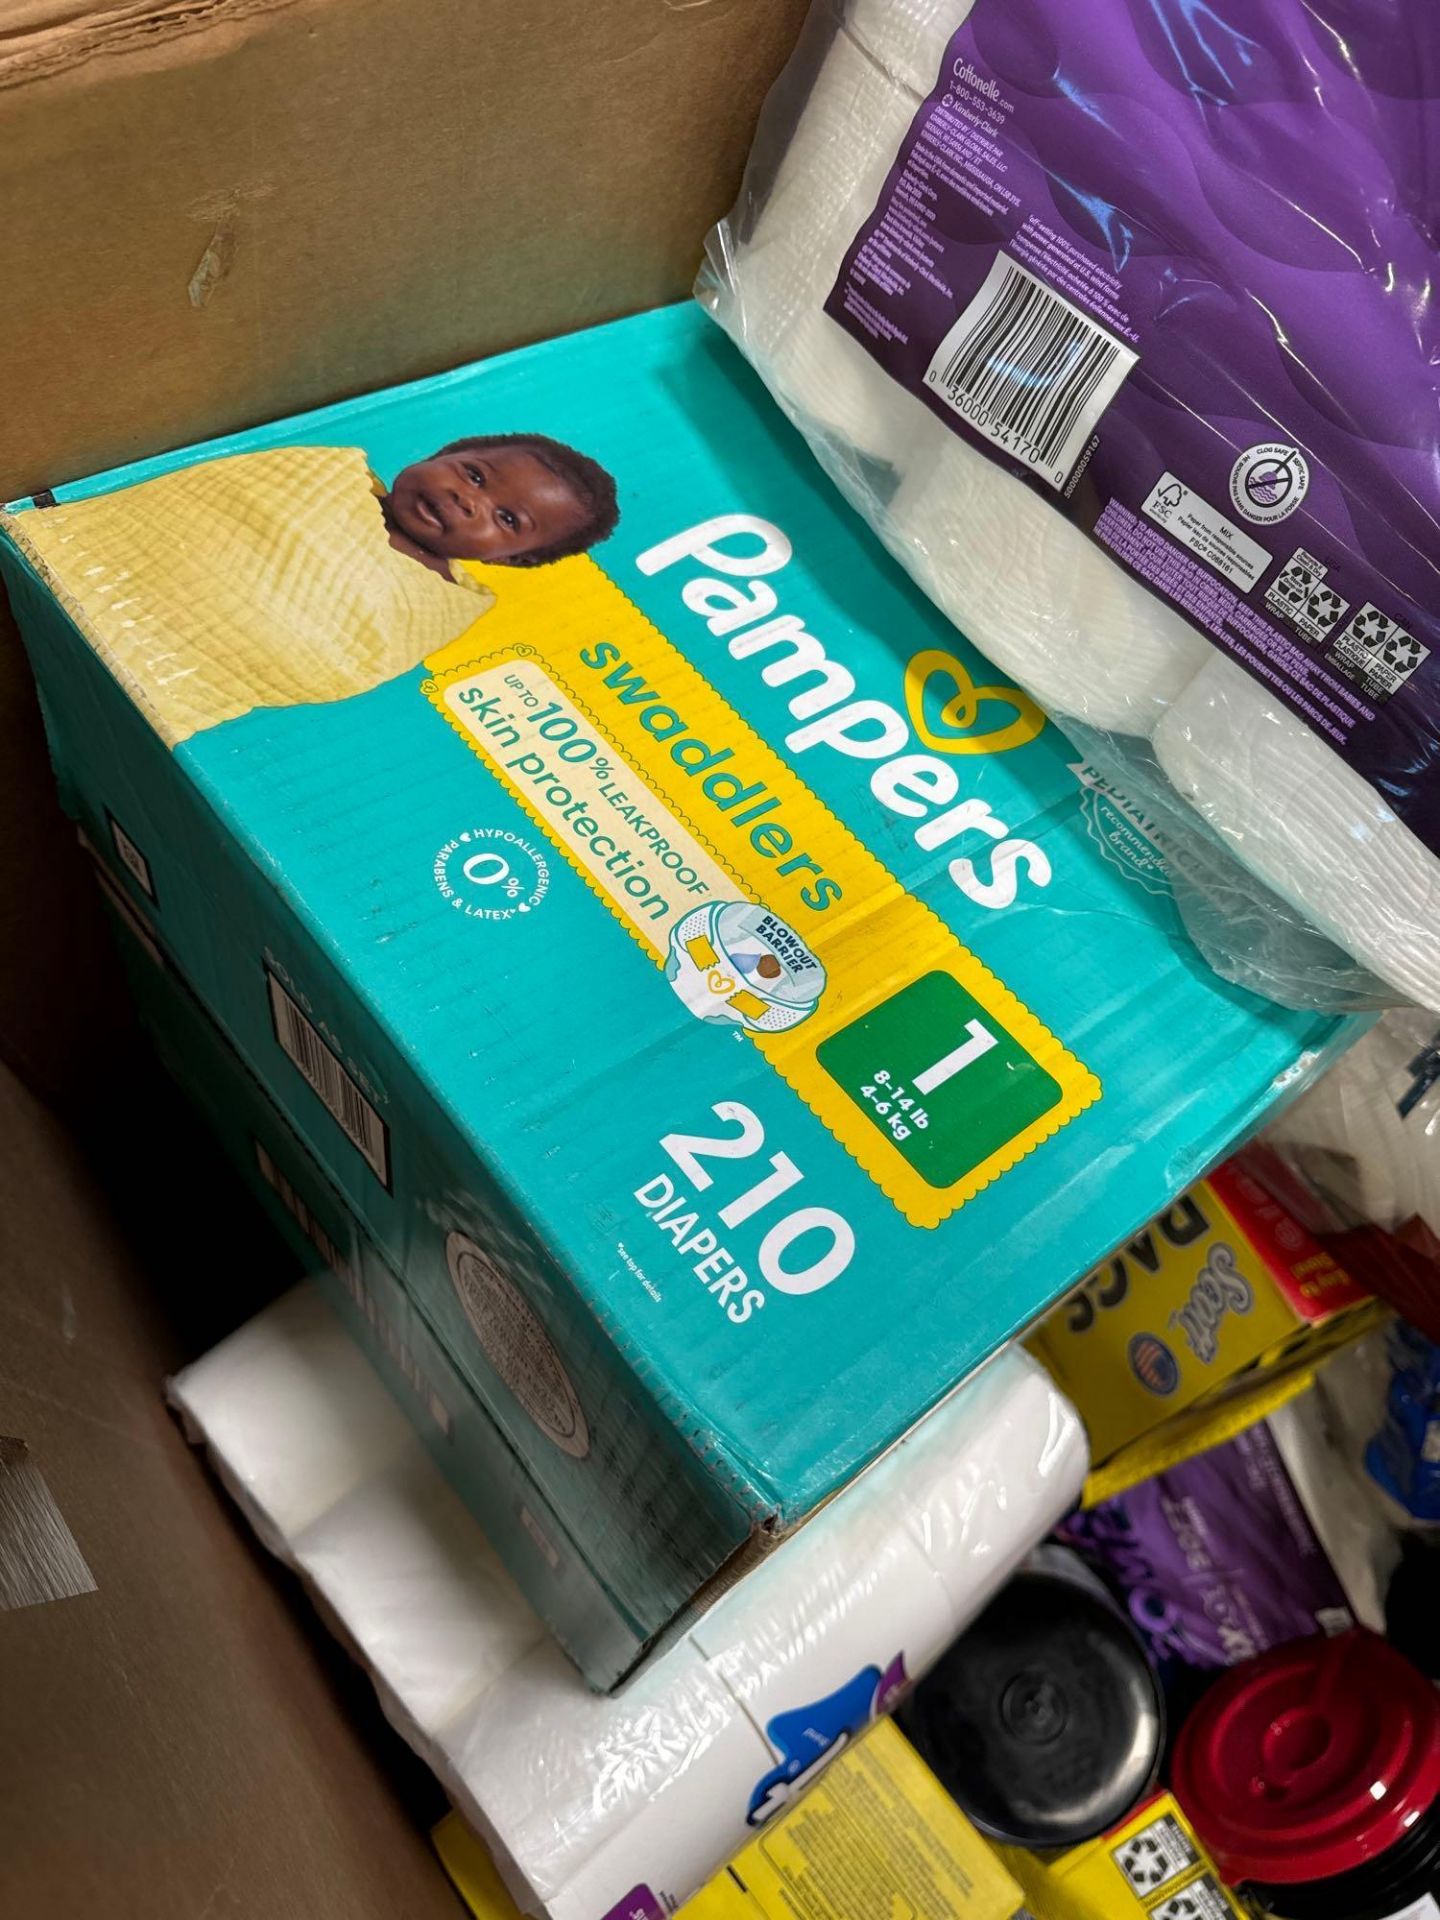 Scott Toilet paper, Cottoneel, Rags in a box, pampers proscrub and more - Image 4 of 6